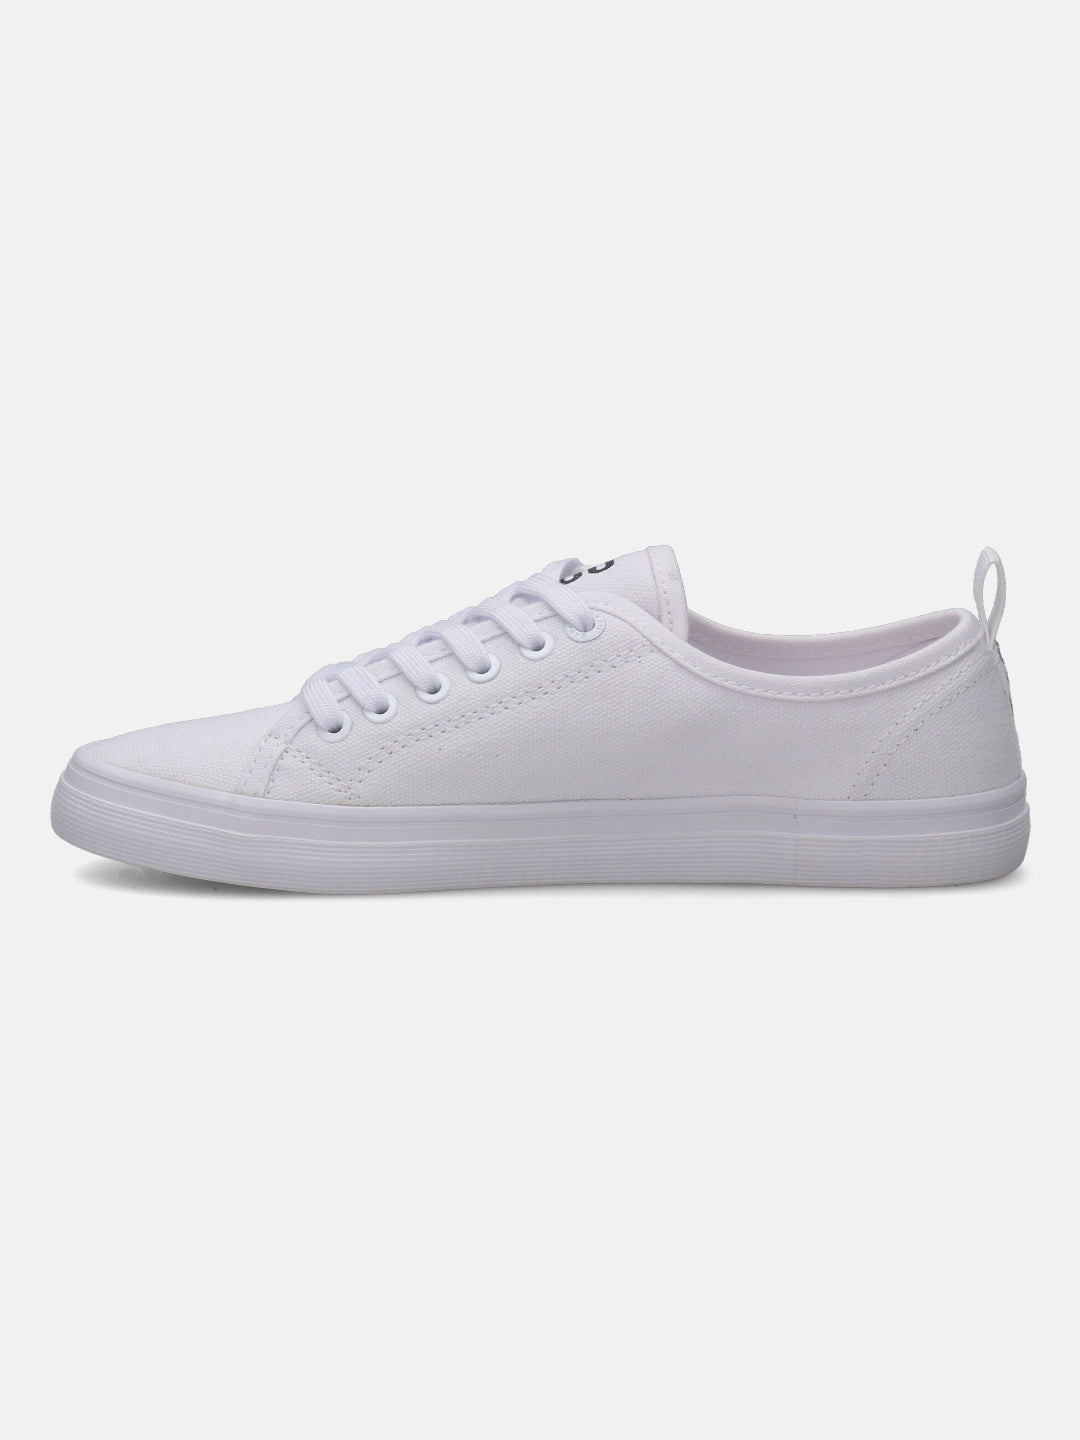 White Sneakers - Classic and Versatile Footwear